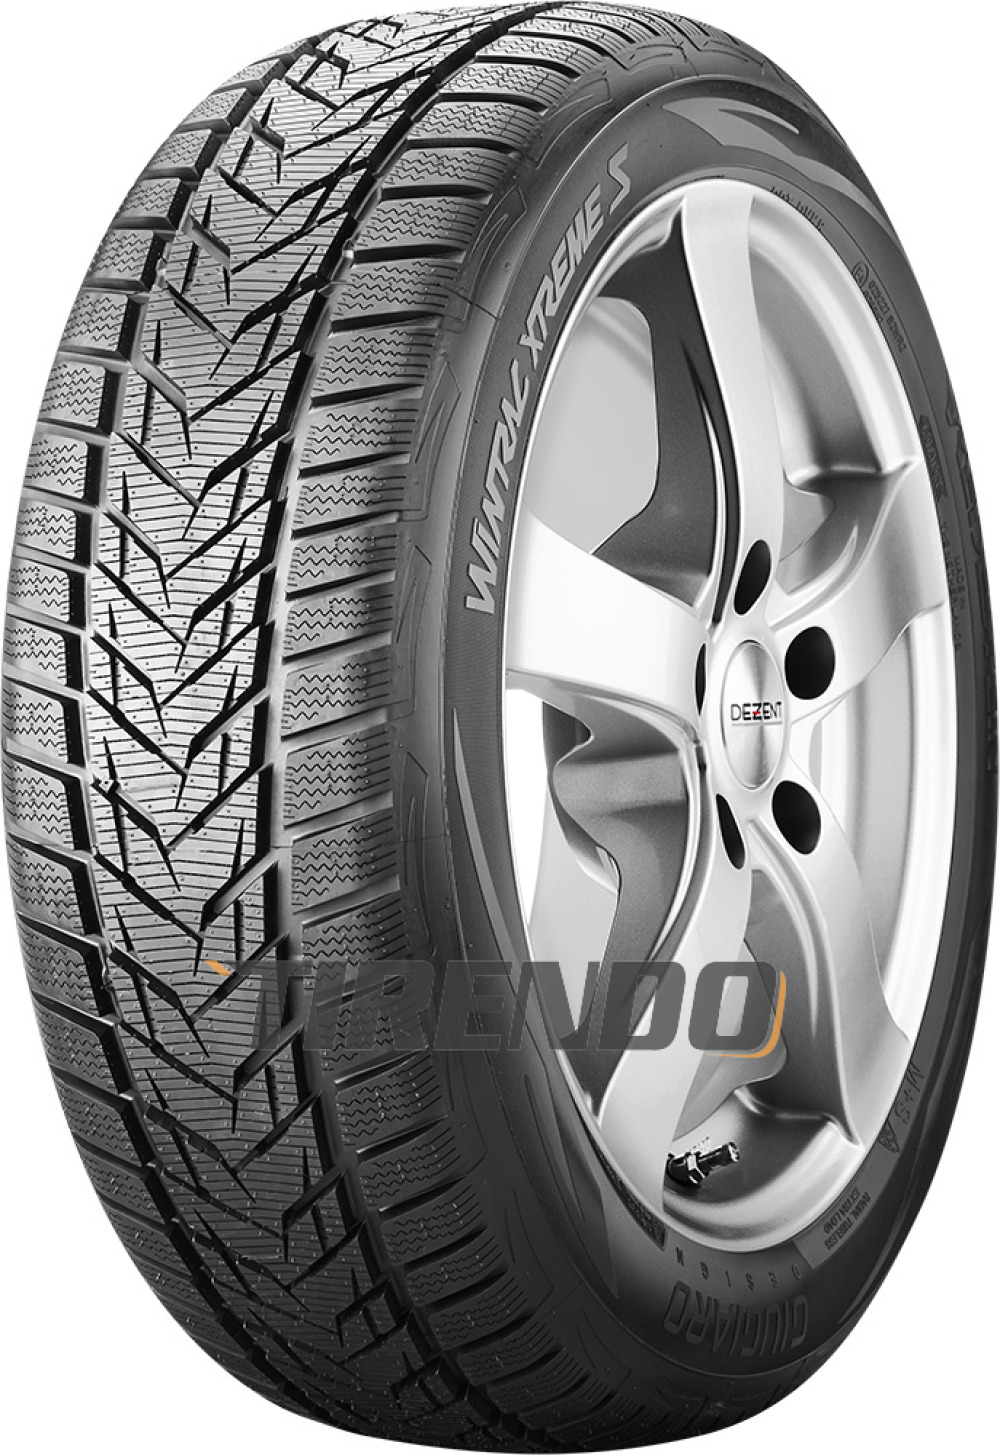 Image of Vredestein Wintrac Xtreme S ( 245/40 R18 97Y XL )